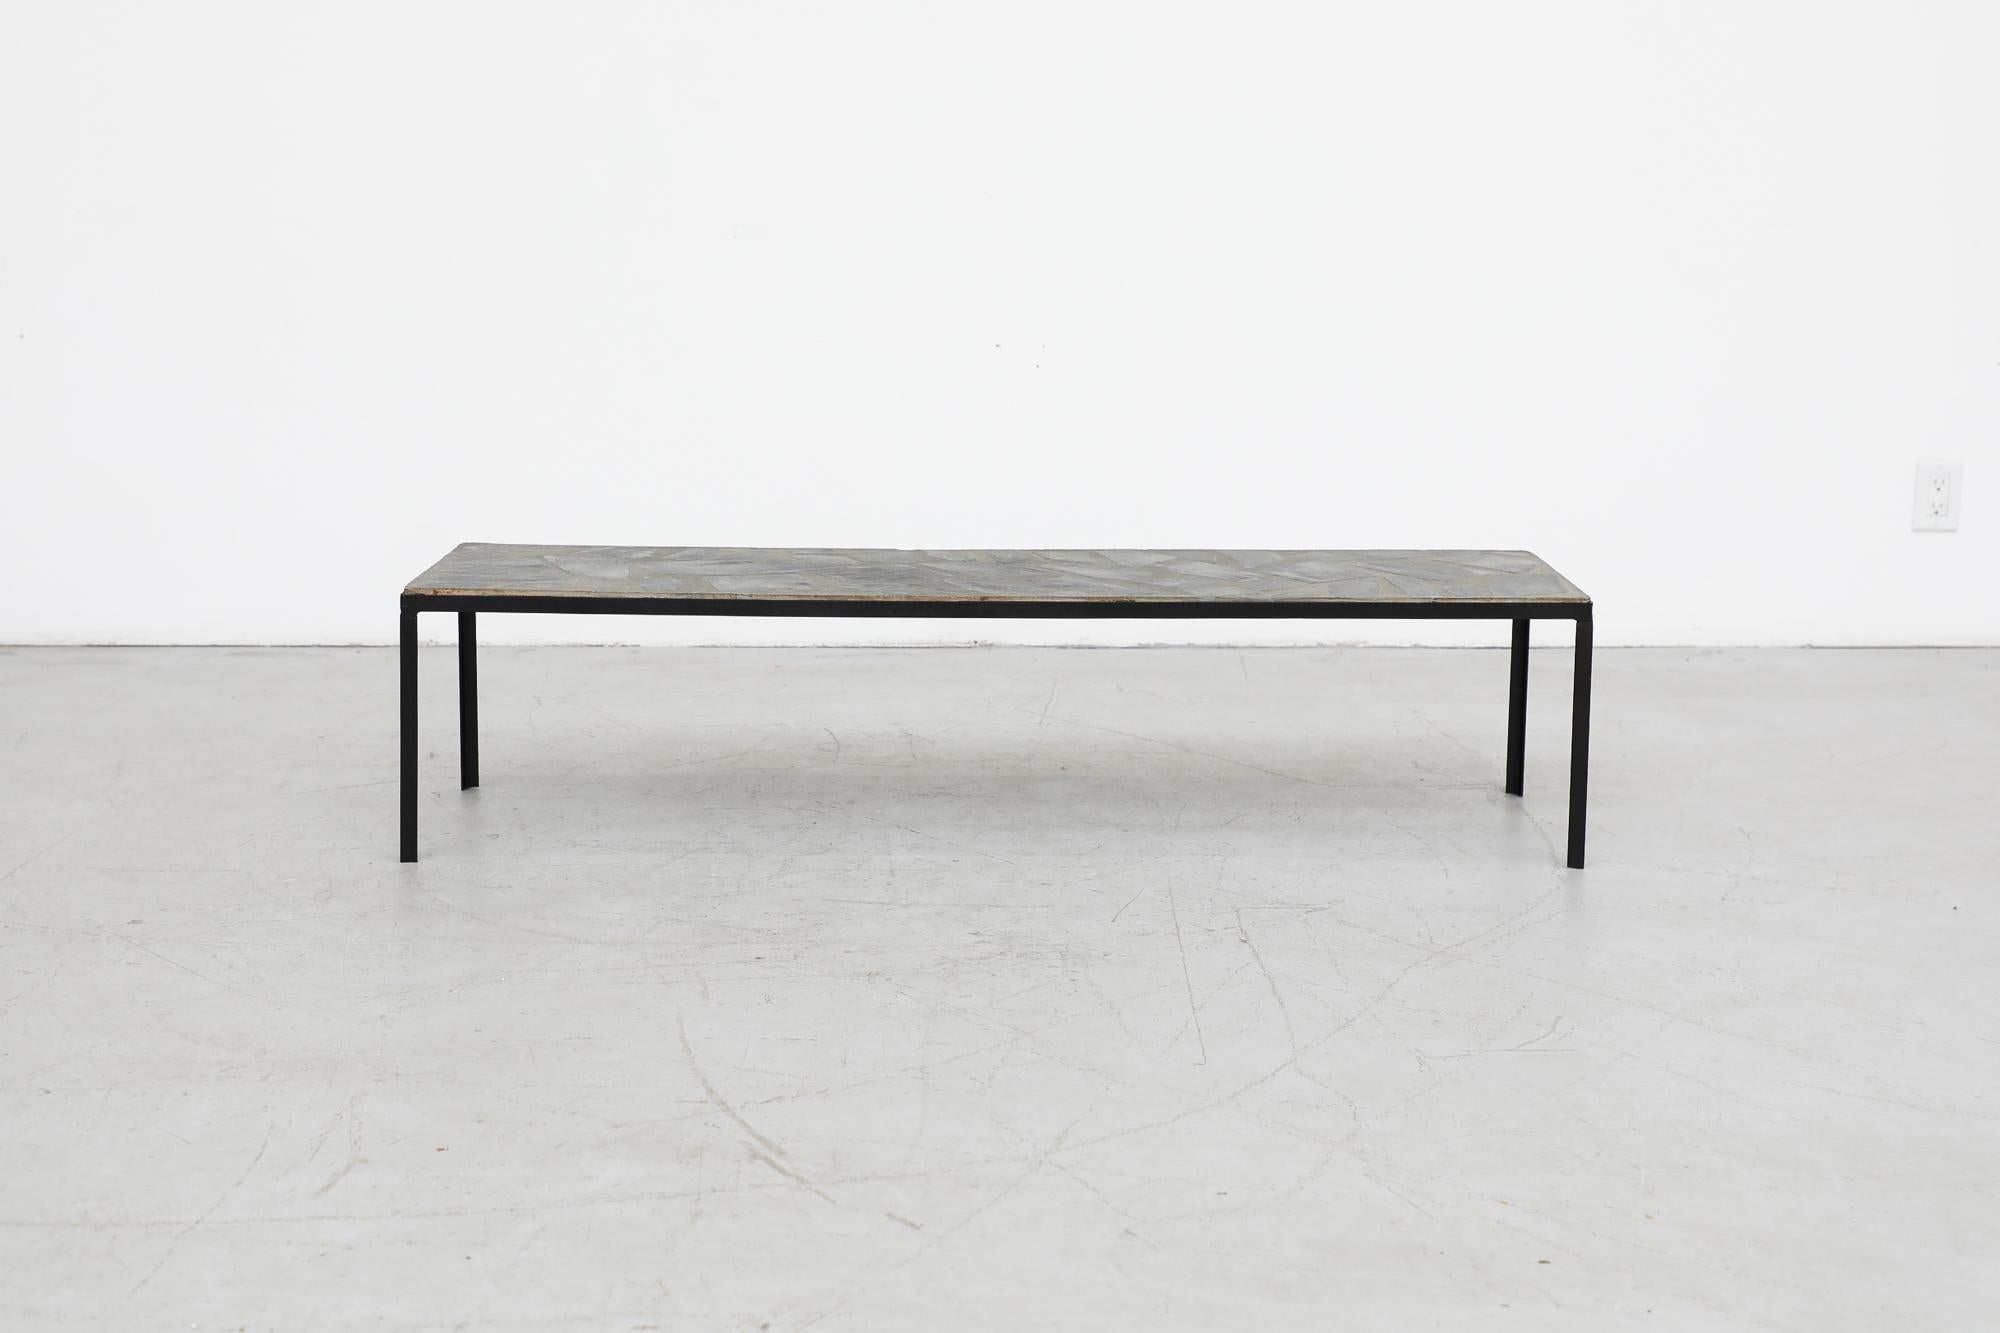 Extra long and low natural stone mosaic table with black industrial metal frame. In original condition with visible wear consistent with its age and use.